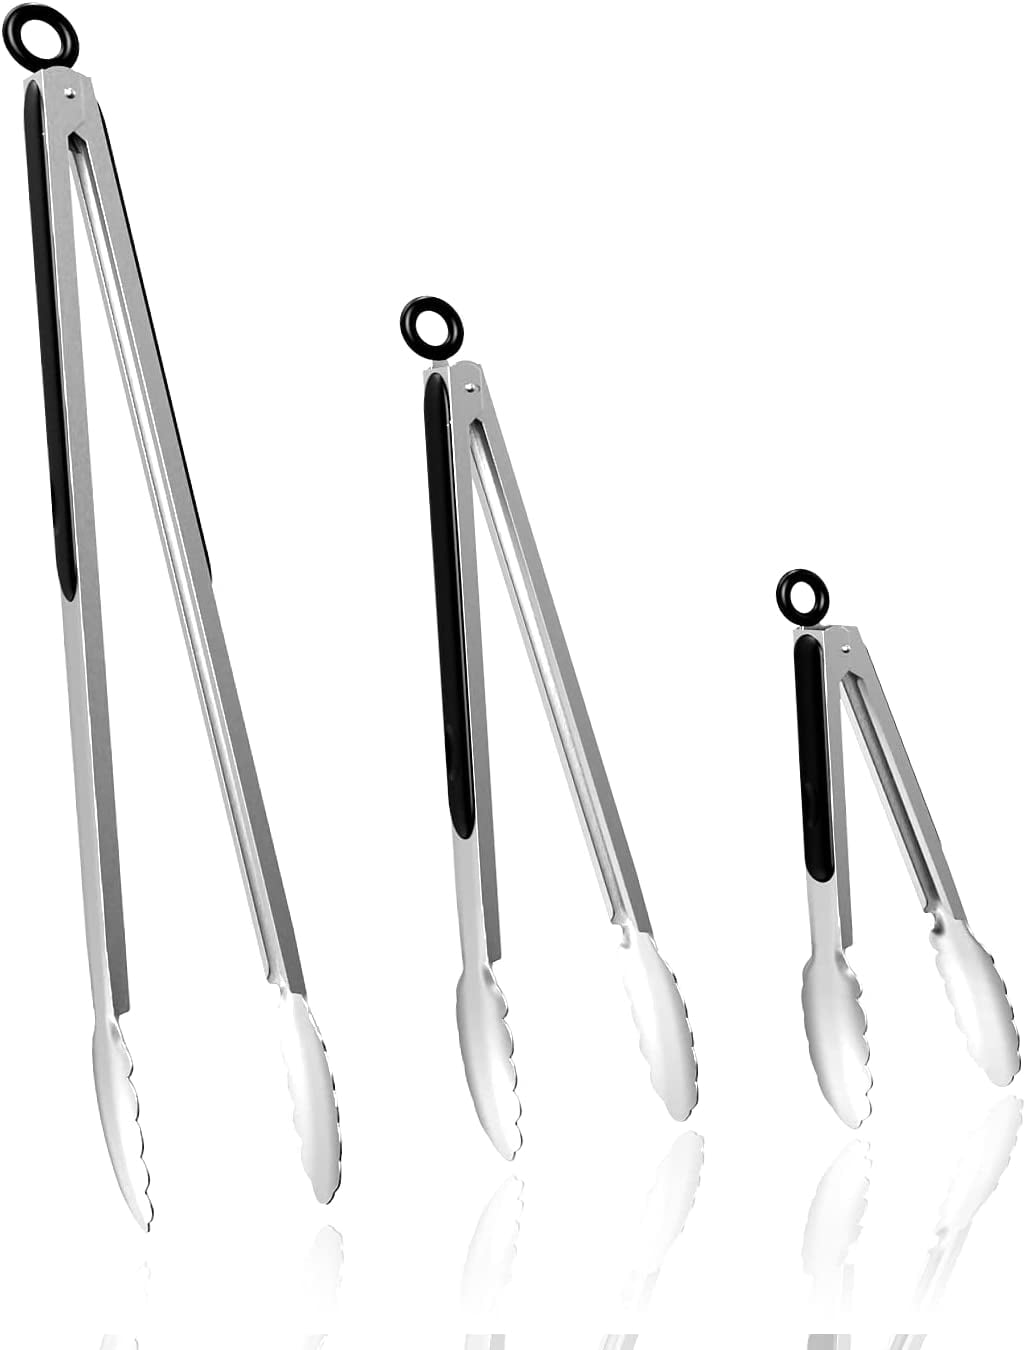 9 Inch and 12 Inch Set of 2 Stainless Steel and Silicone Kitchen Tongs and Cooking Utensils with Built-in Stand 